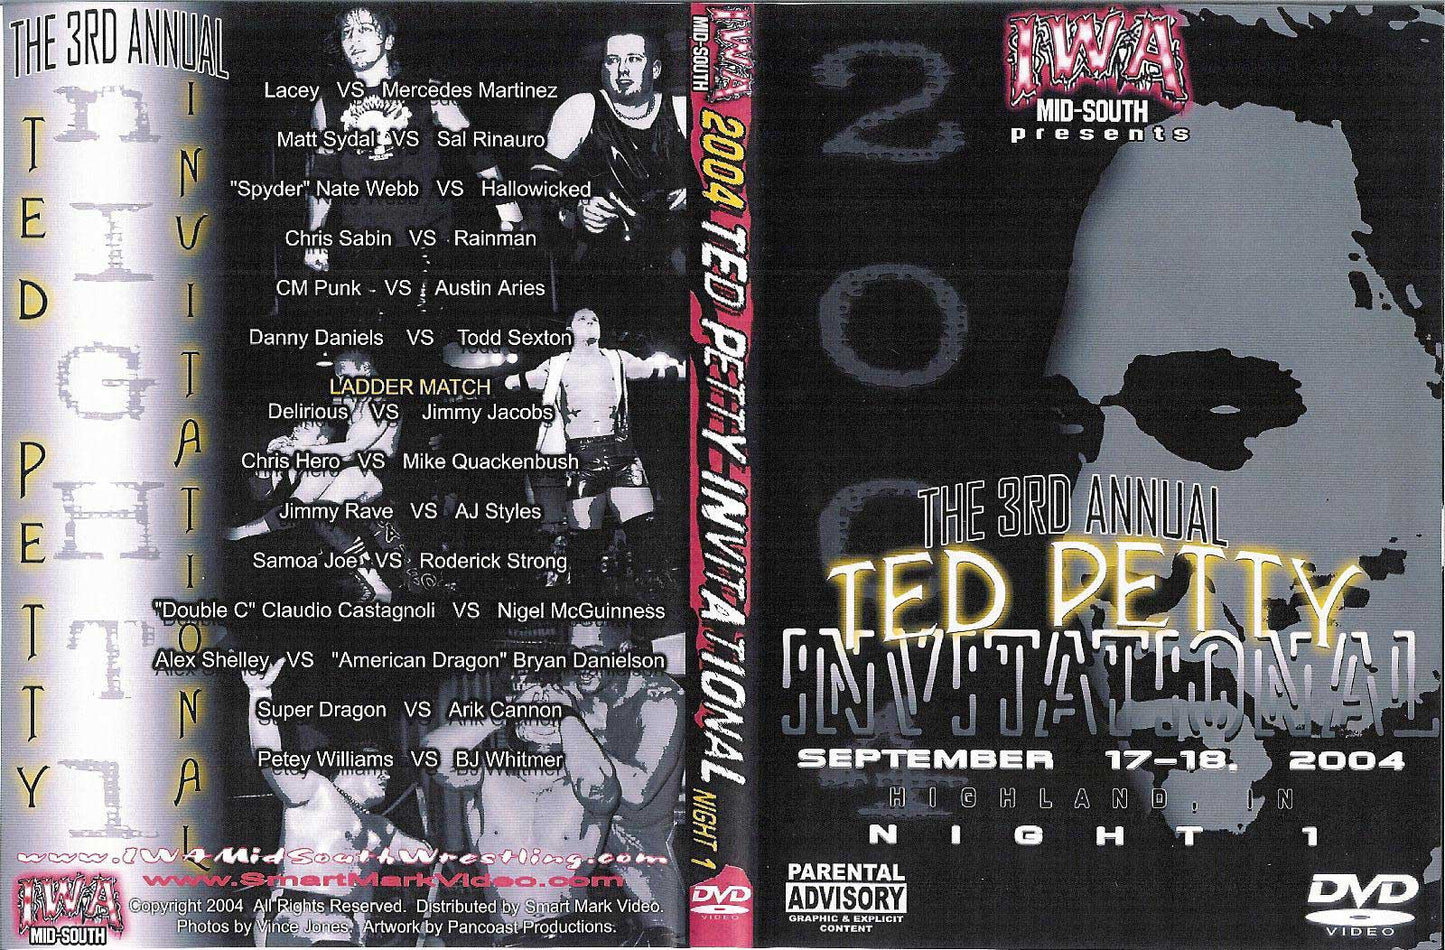 the 3rd annual ted petty invitational night 1